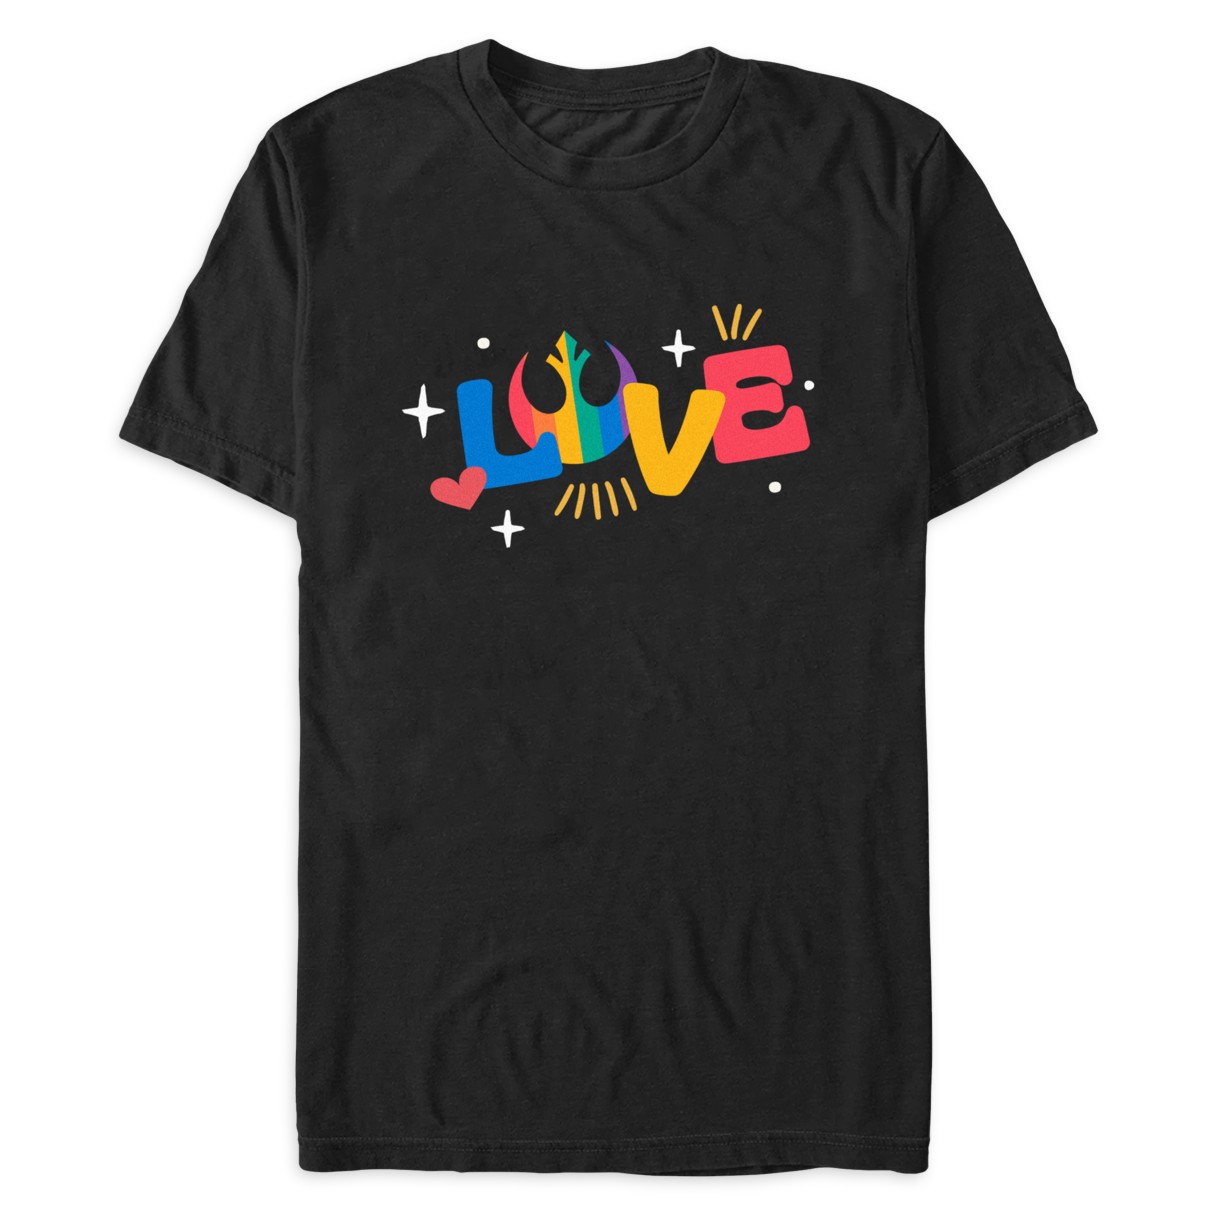 Star Wars ''Rebel Love'' T-Shirt for Adults – Star Wars Pride Collection